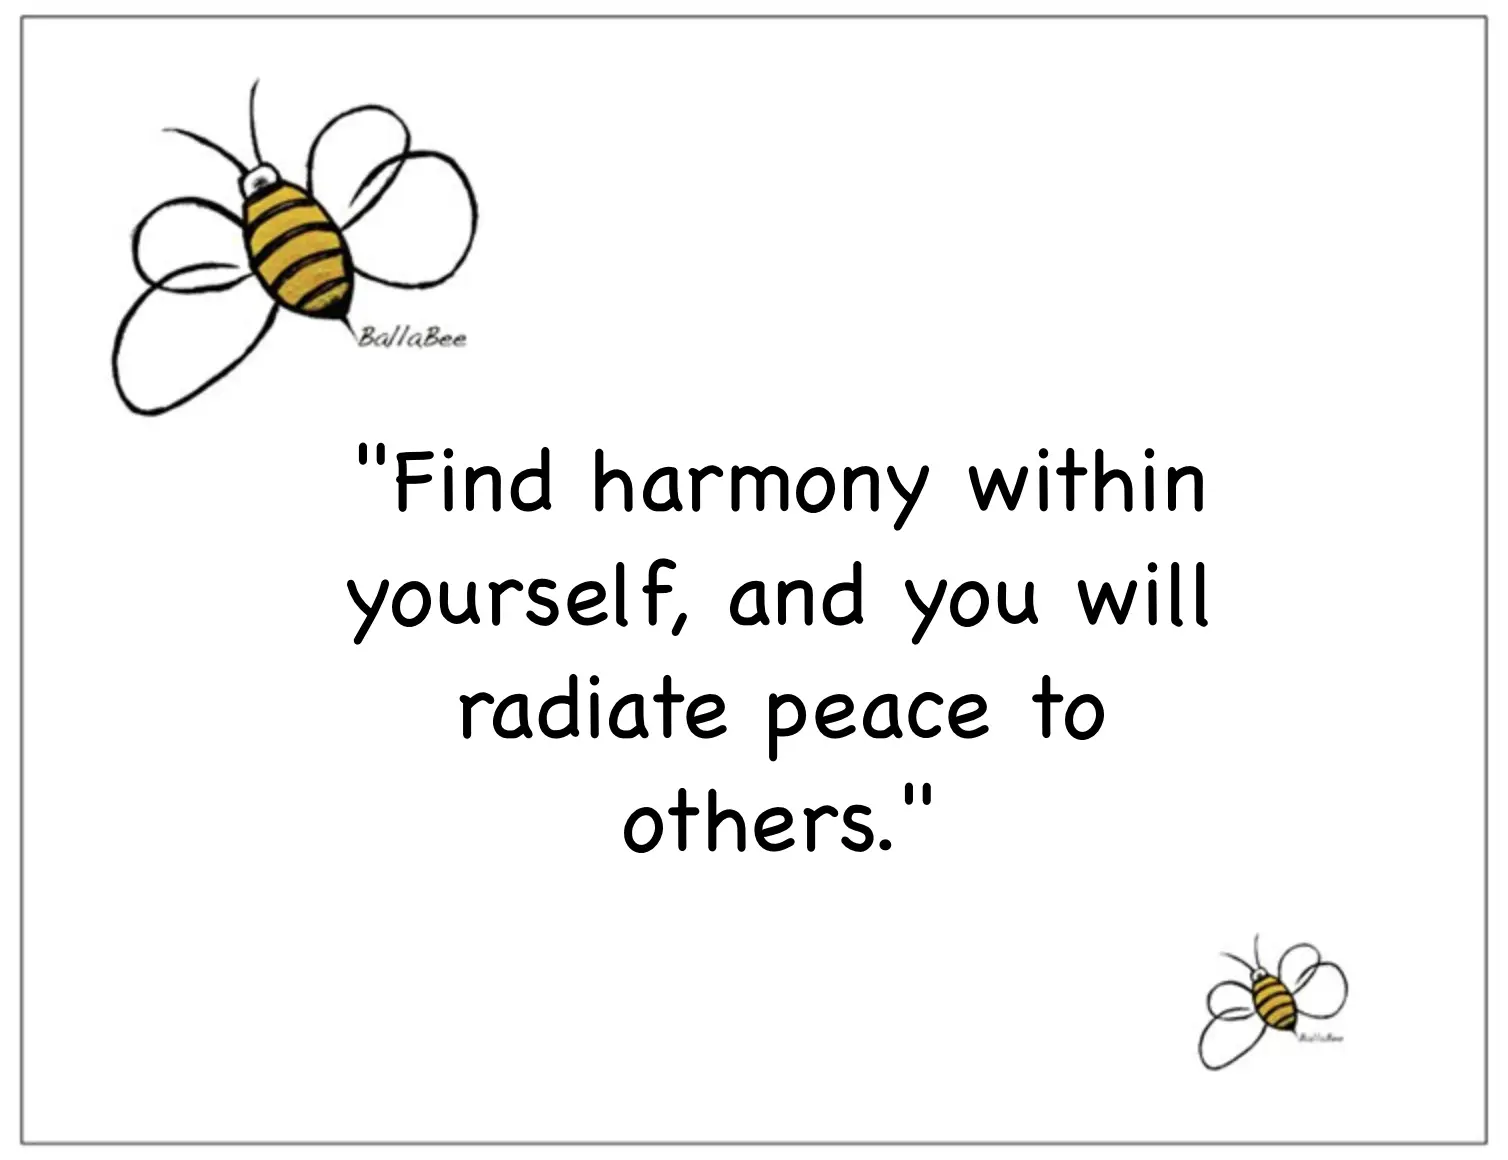 Find harmony within yourself, and you will radiate peace to others